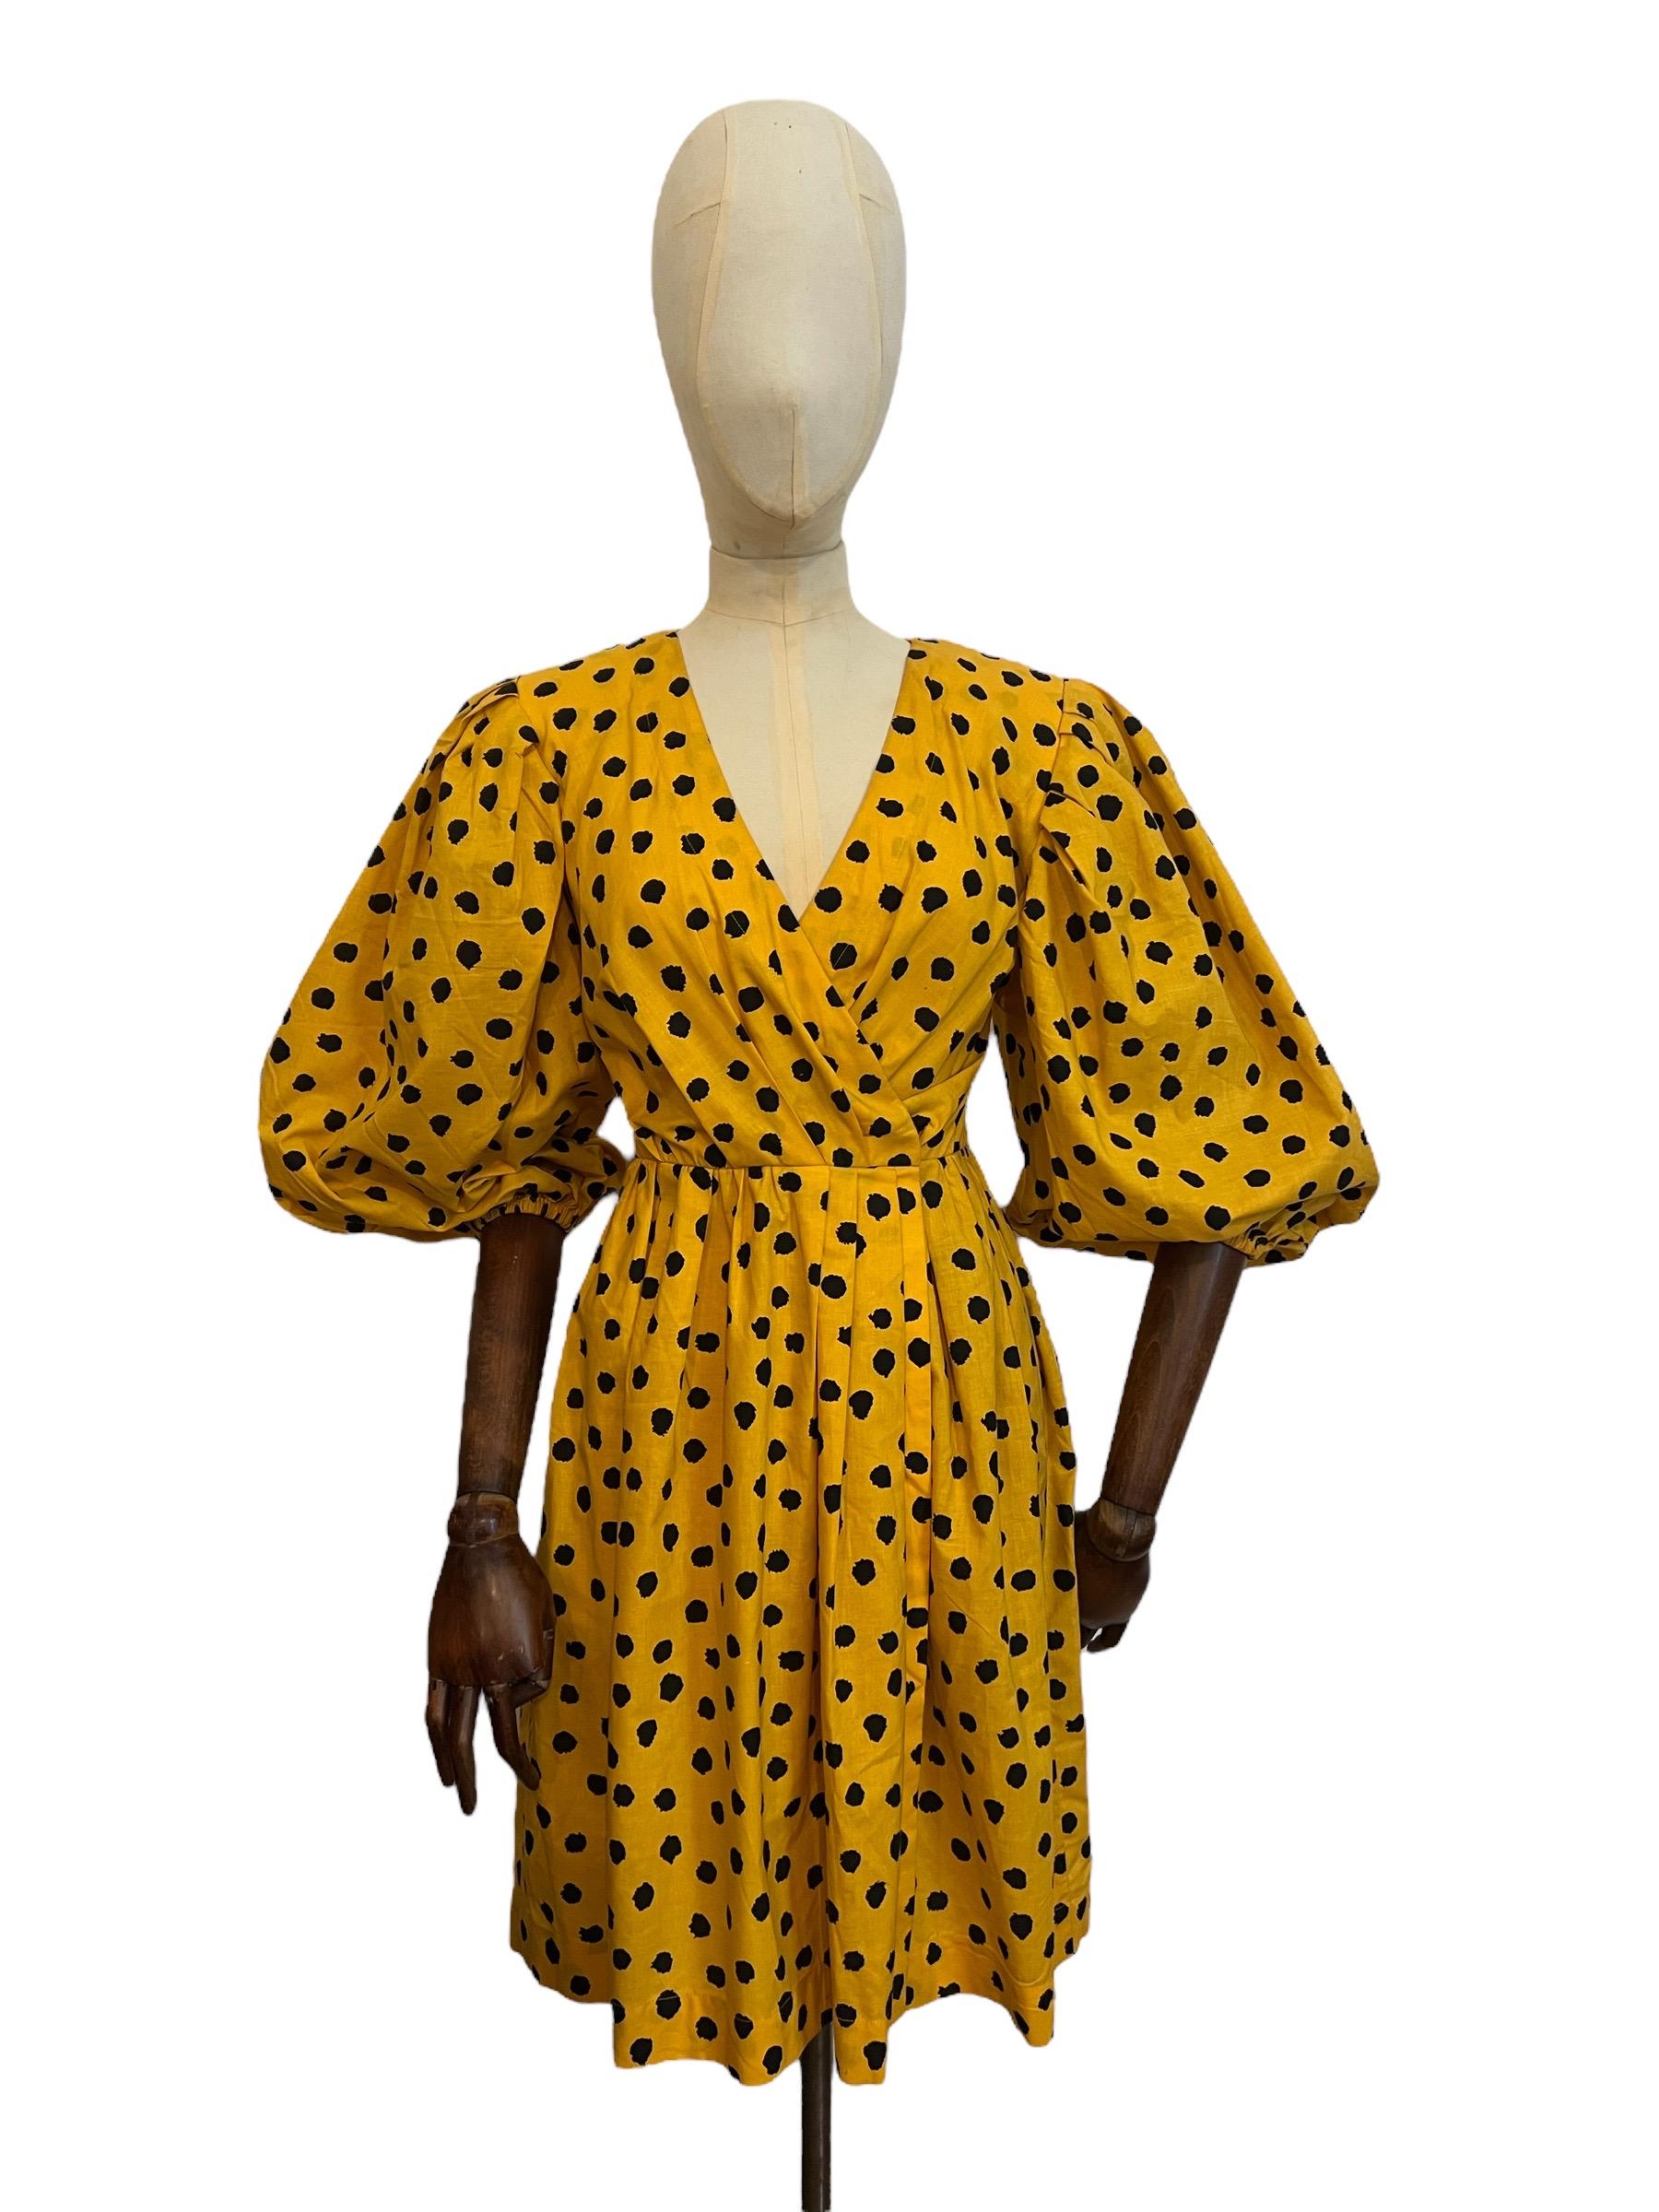 Beautiful Vintage Yves Saint Laurent 'Variation Rive Gauche' Dress circa 1980.

An Elegant cross over, deep V style dress, with a nipped waist, incredible balloon sleeves and relaxed slouchy hip pockets in Yellow with Black Paint like sploshes of